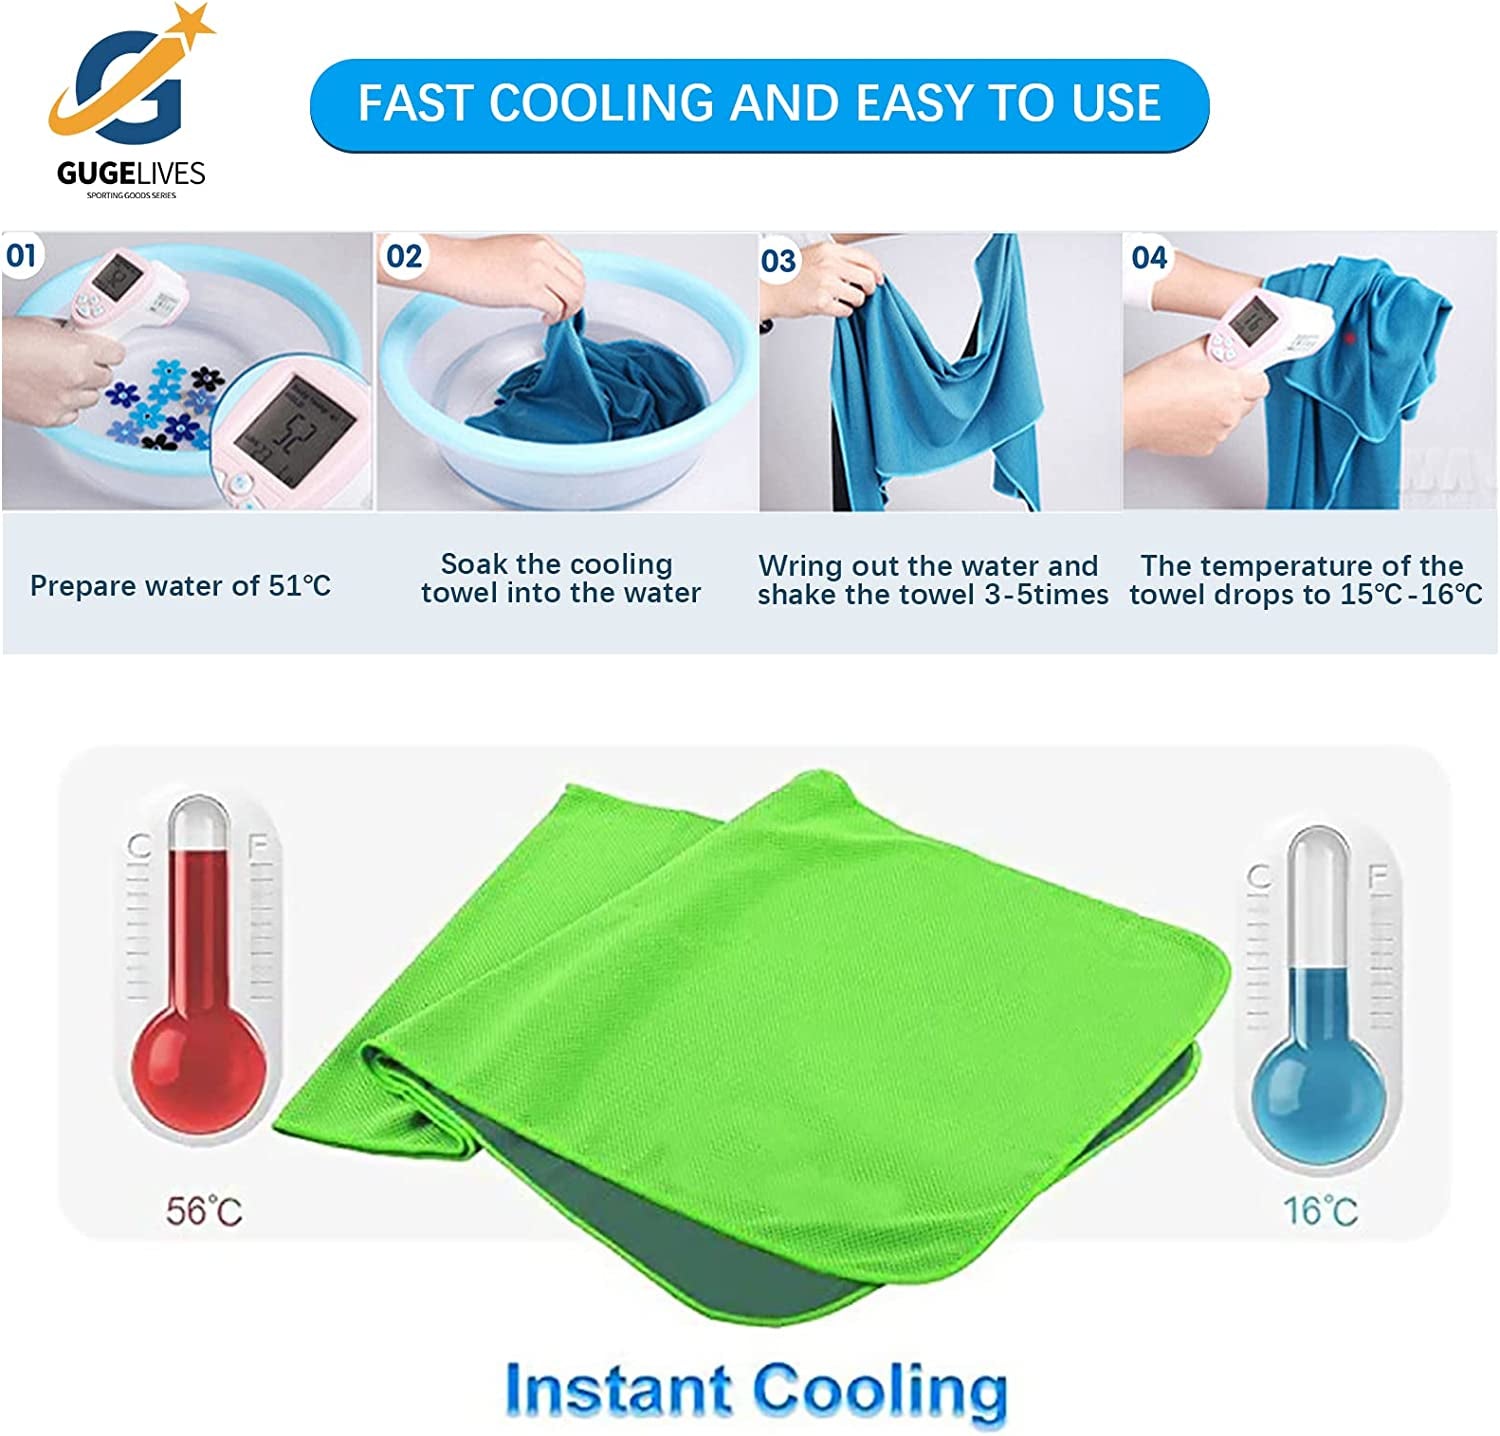 [6 Pack] Cooling Towel, Ice Sports Towel, Cool Towel for Instant Cooling,For Yoga, Travel, Golf, Gym,Camping, Fitness, Running, Workout & More Activities (35"X12")